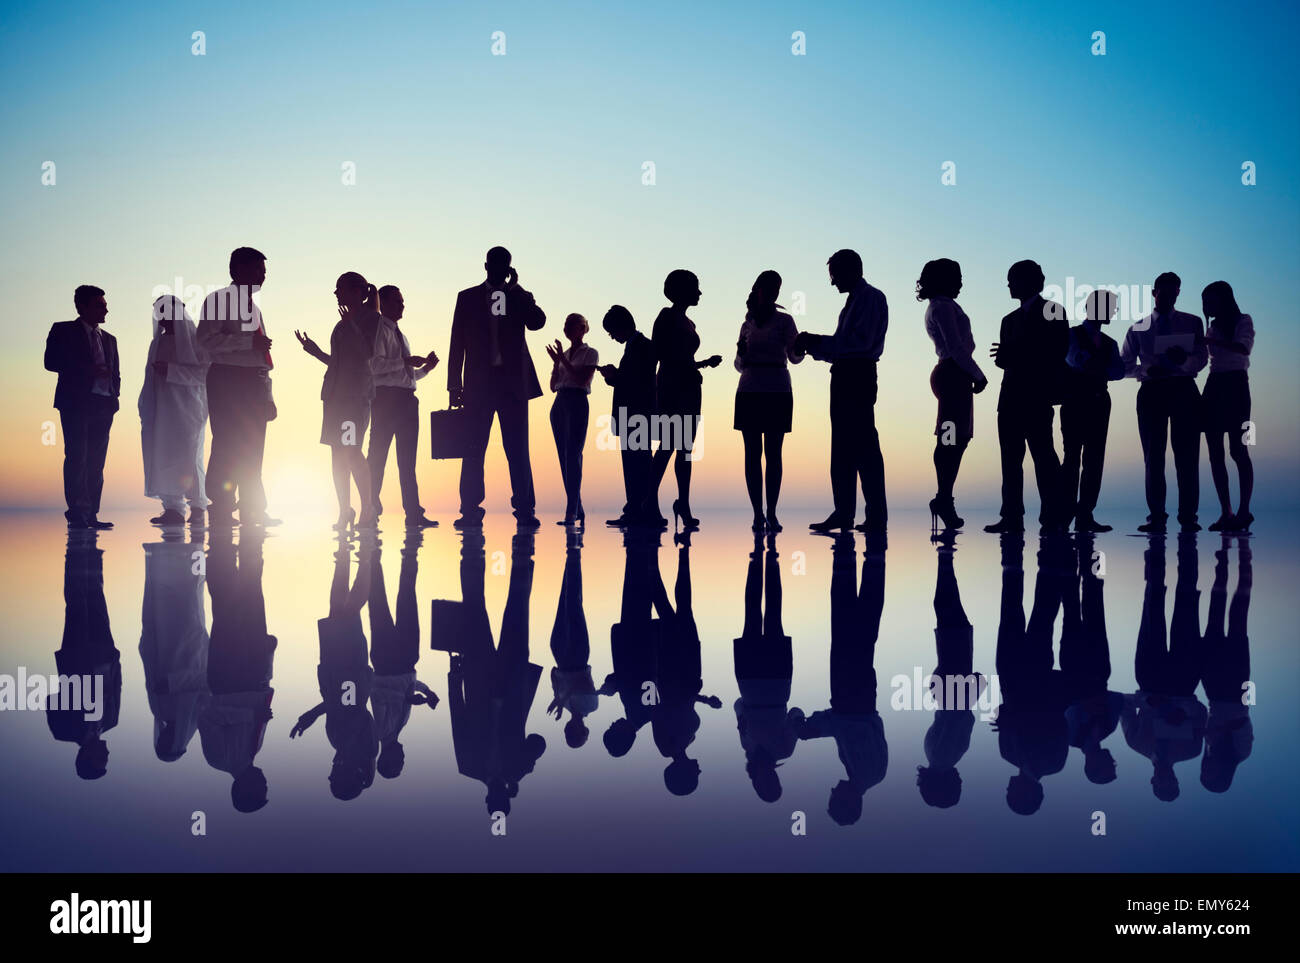 Corporate Business People Working Outdoors Stock Photo